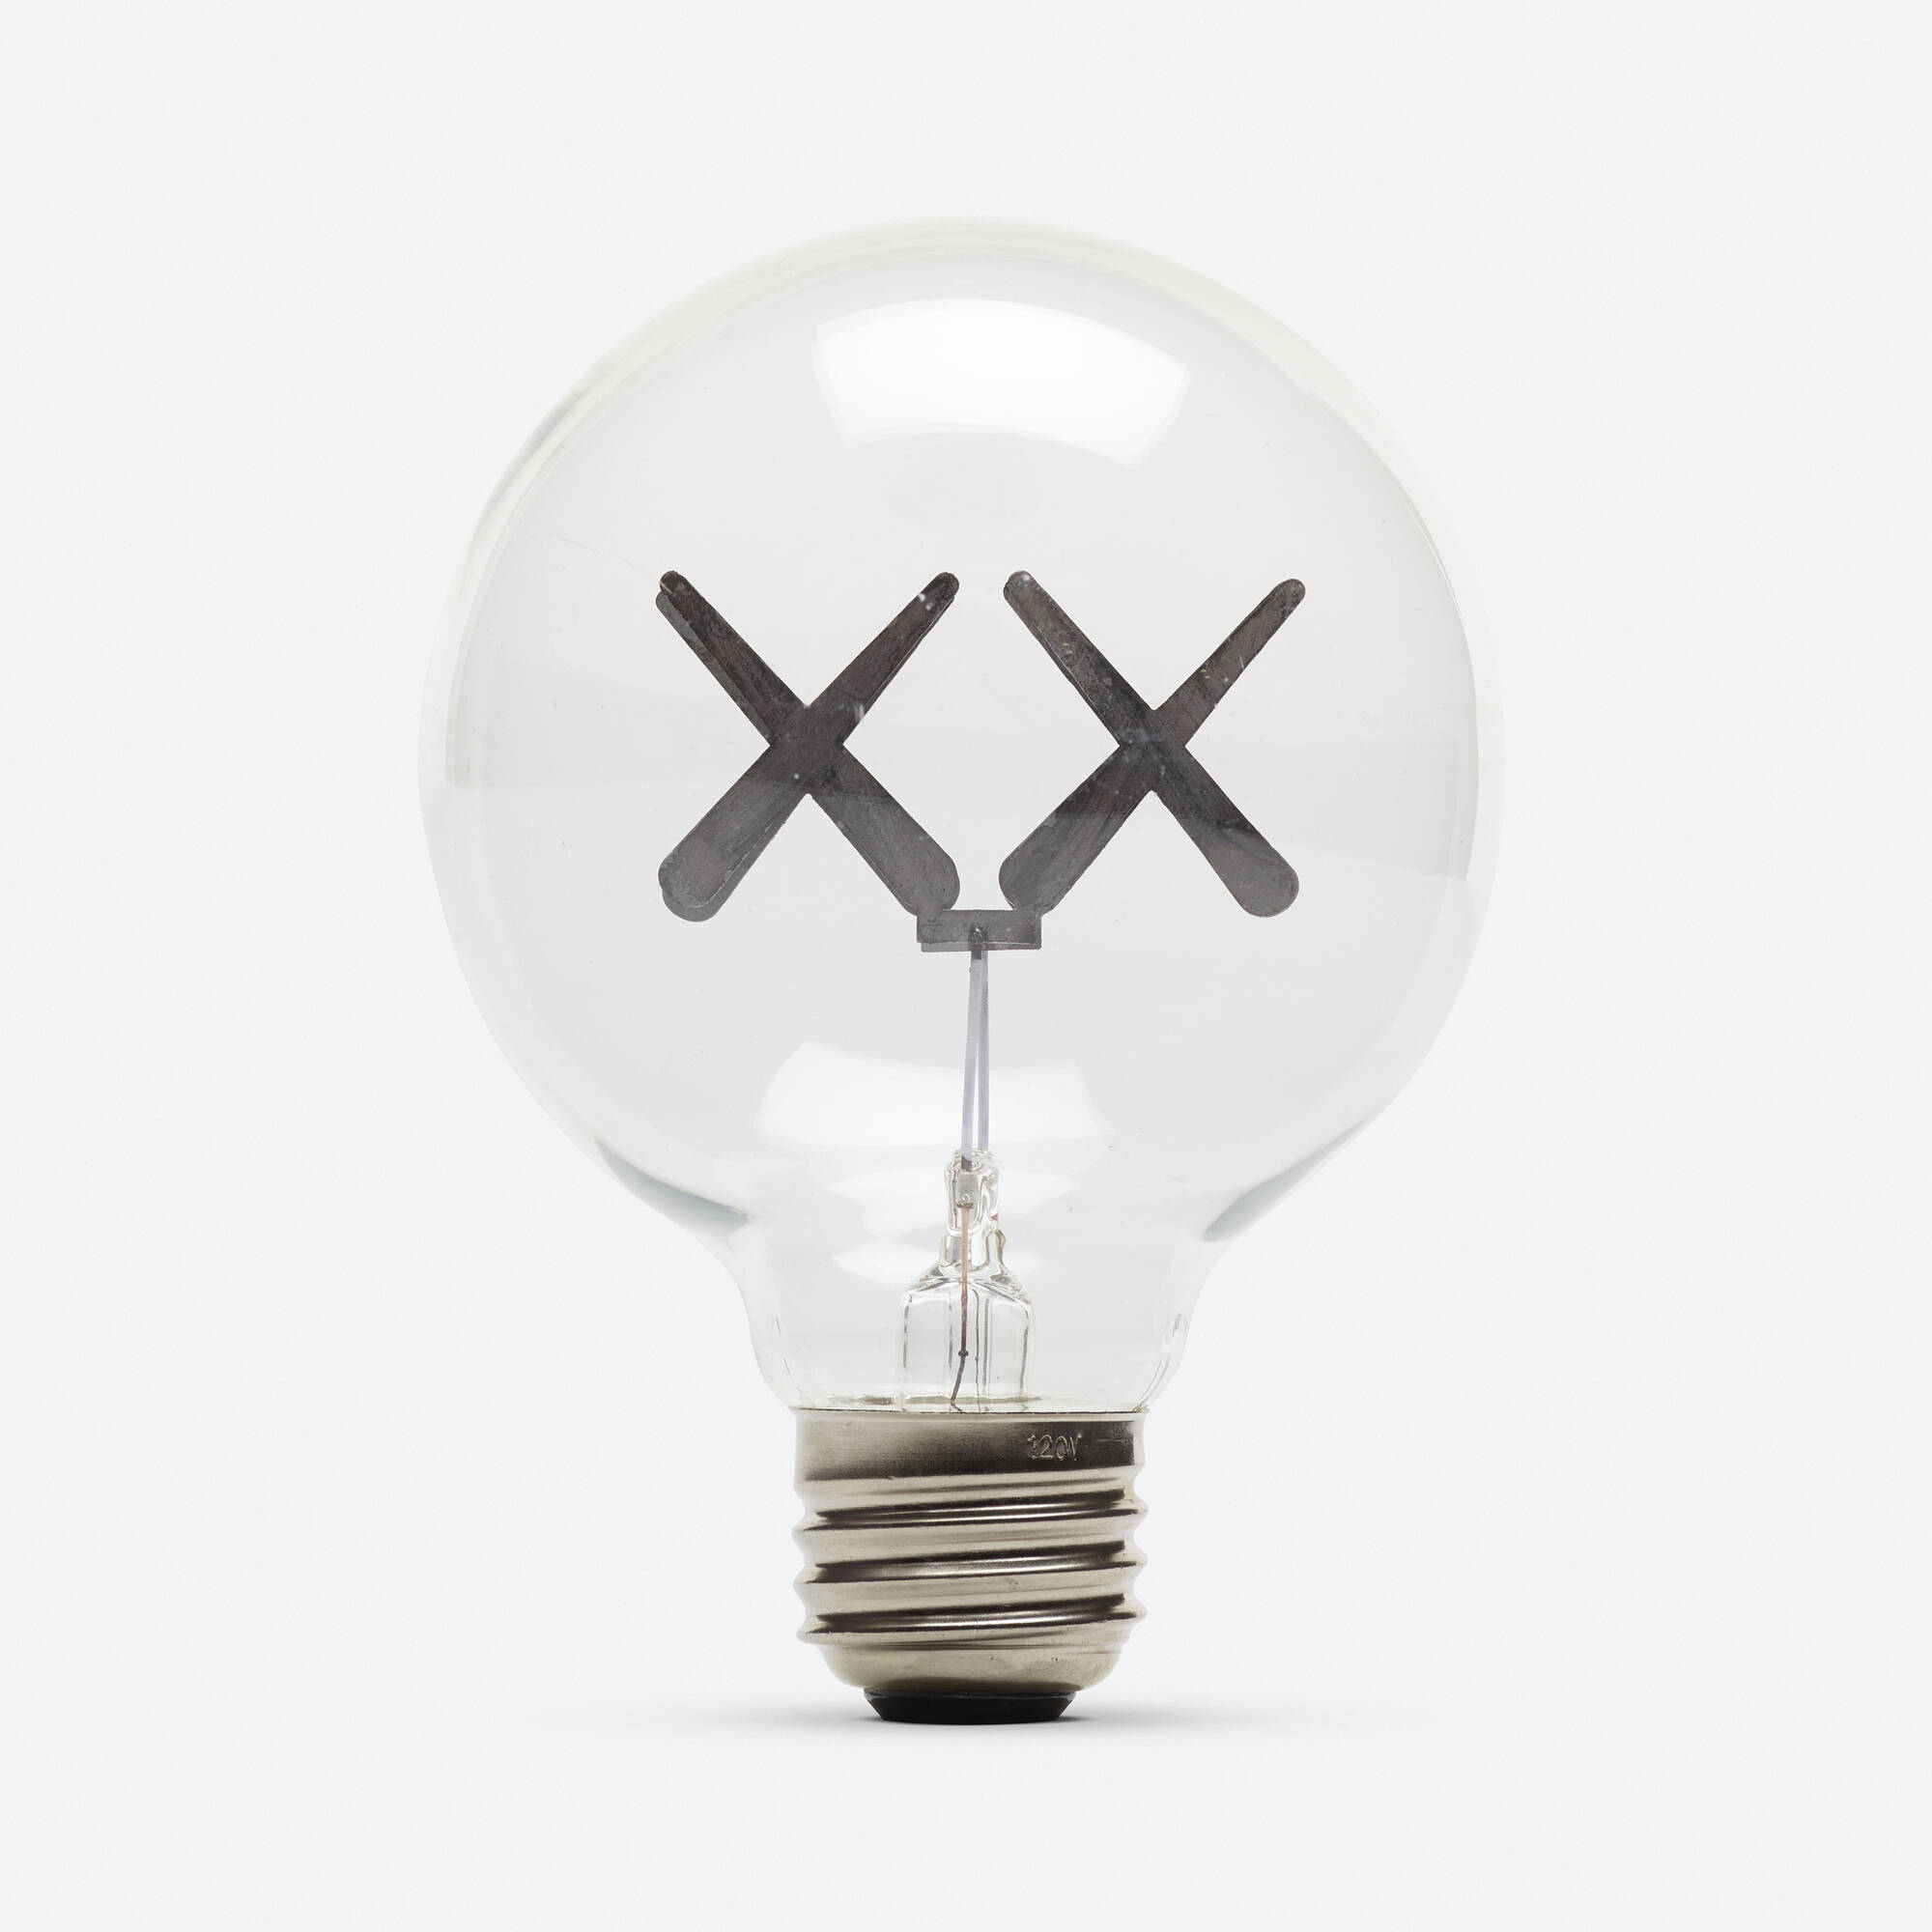 153: KAWS (BRIAN DONNELLY), The Standard Hotel light bulb 